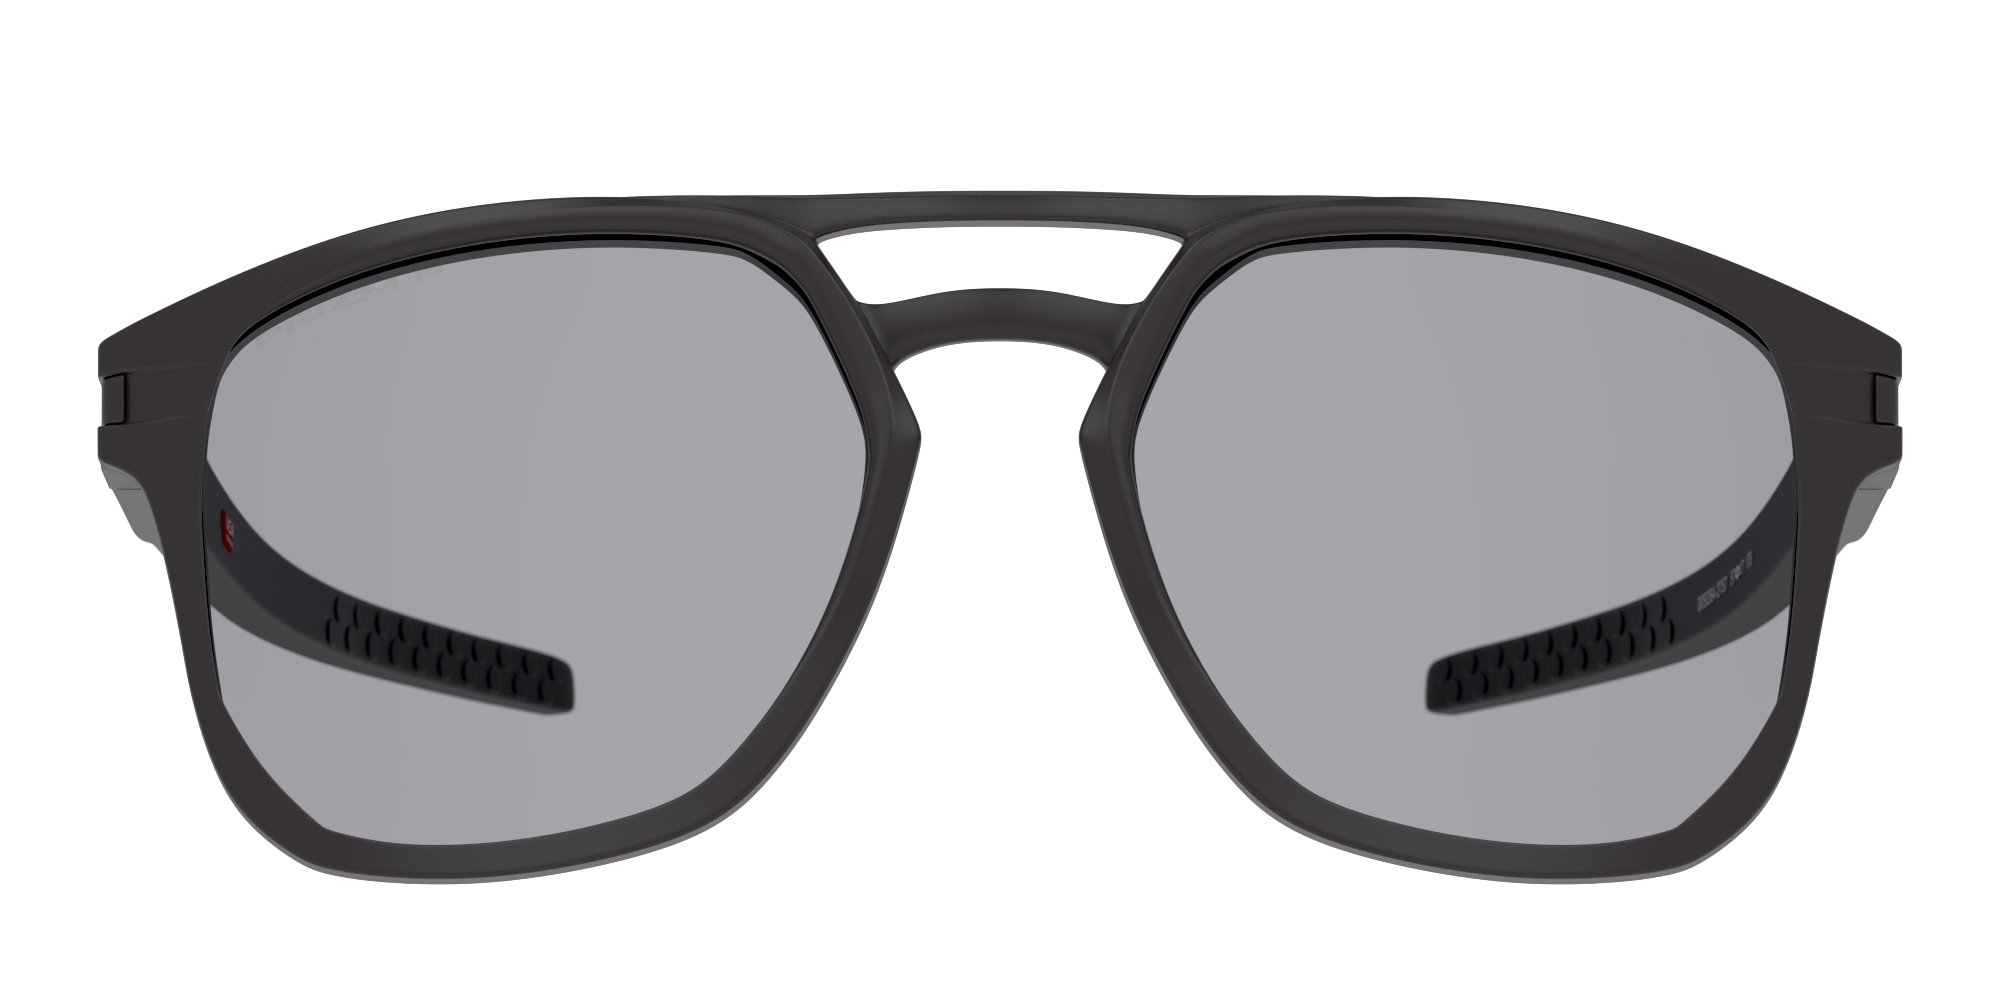 [products.image.front] OAKLEY OO9436 943605